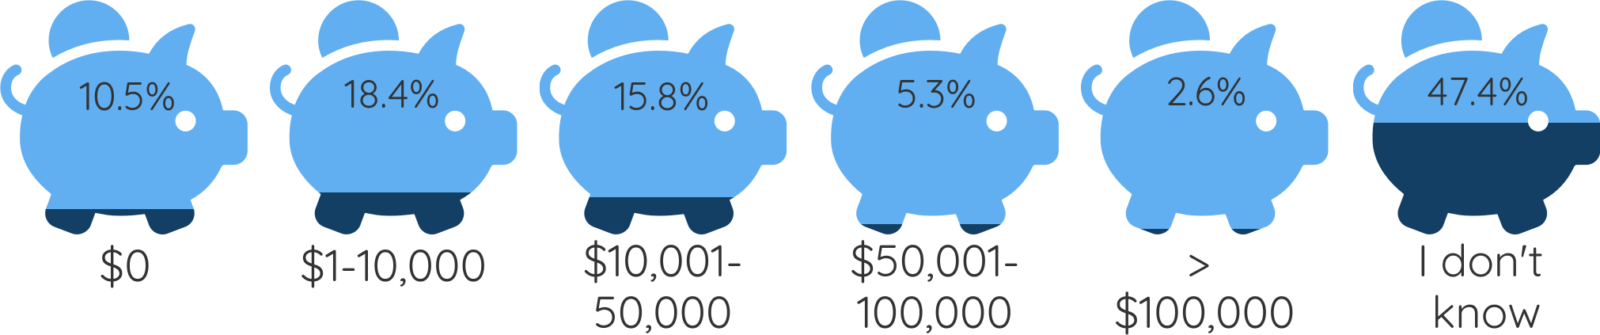 Partially filled piggy bank icons showing: 10.5% - $0; 18.4% - $1-10,000; 15.8% - $10,001-50,000; 5.3% - $50,001 - 100,000; 2.6& greater than $100,000; 47.4% - I don't know